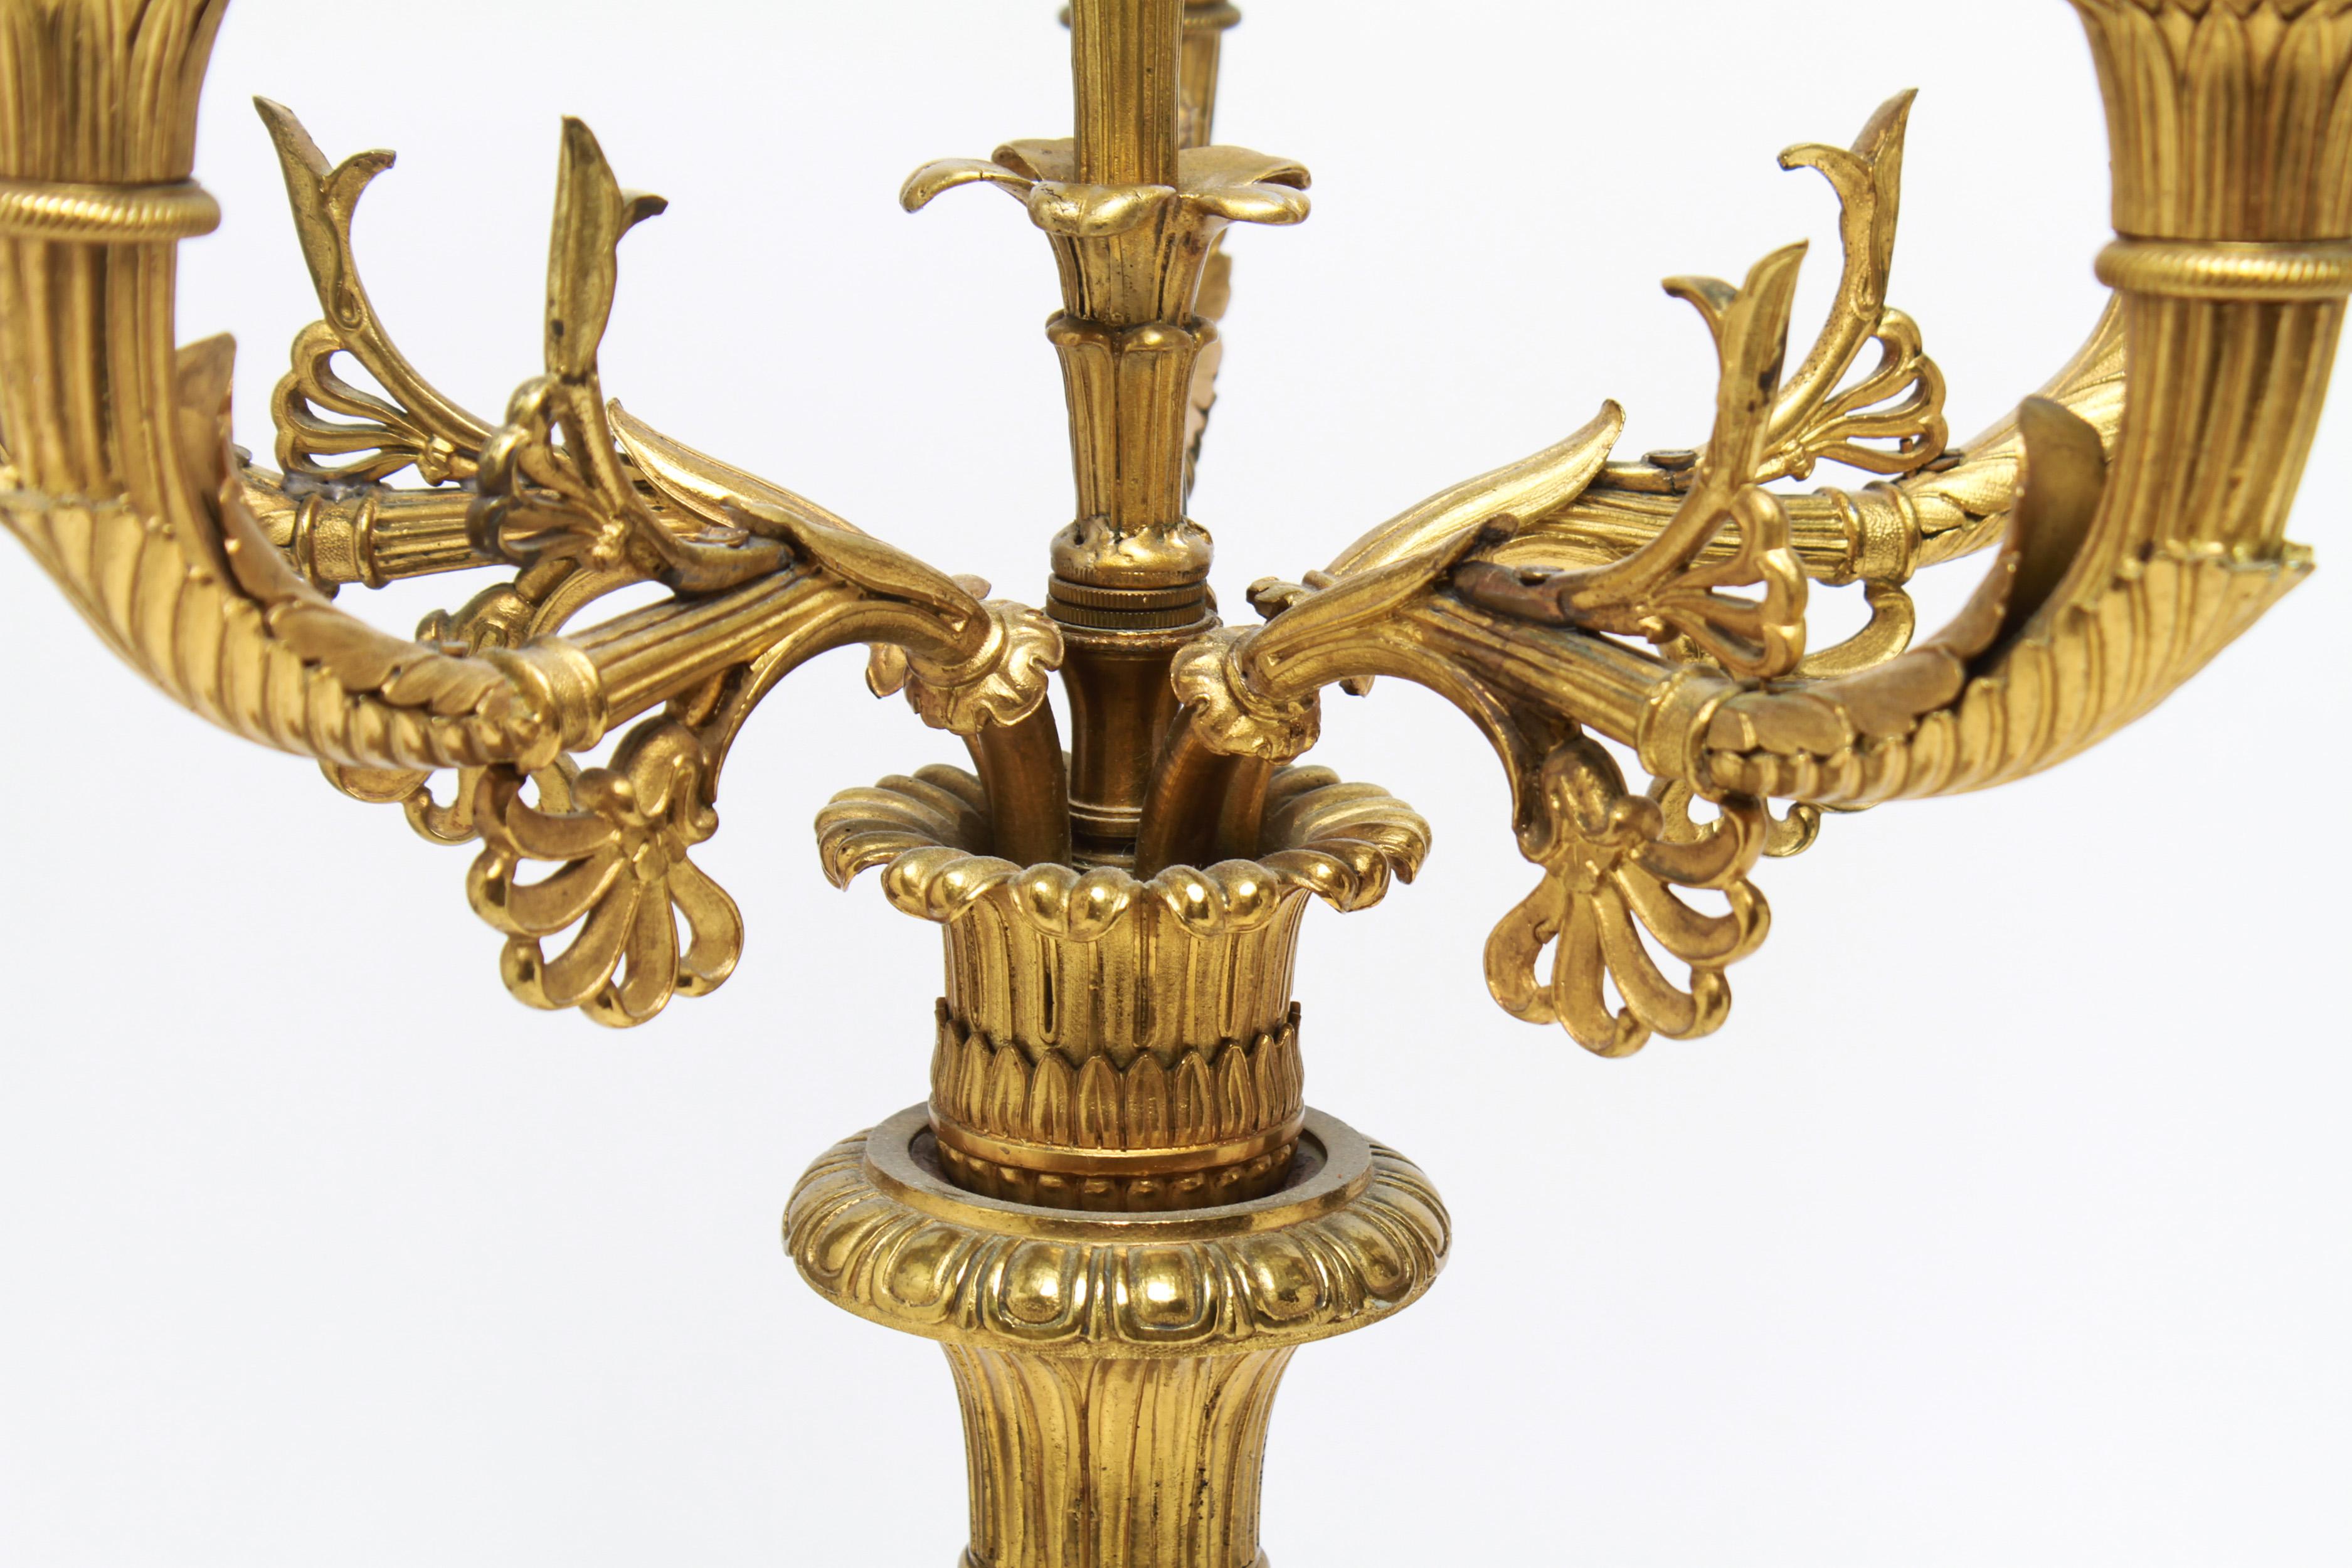 Neoclassical Revival Neoclassical Candelabra Table Lamps in Gilt Bronze